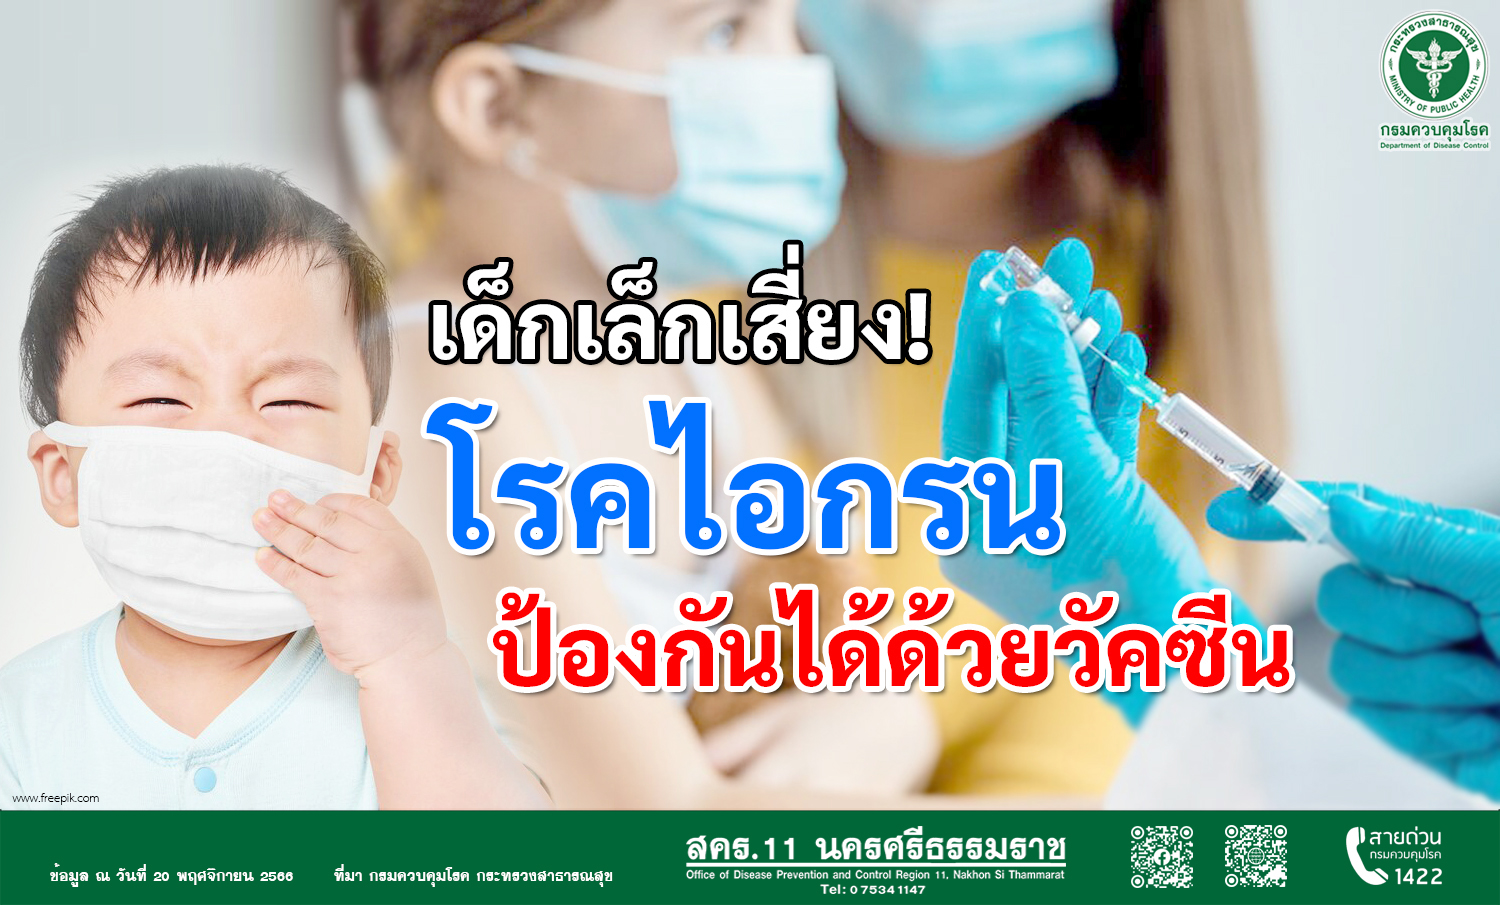 Protect Your Children: Get the Whooping Cough Vaccine Now!